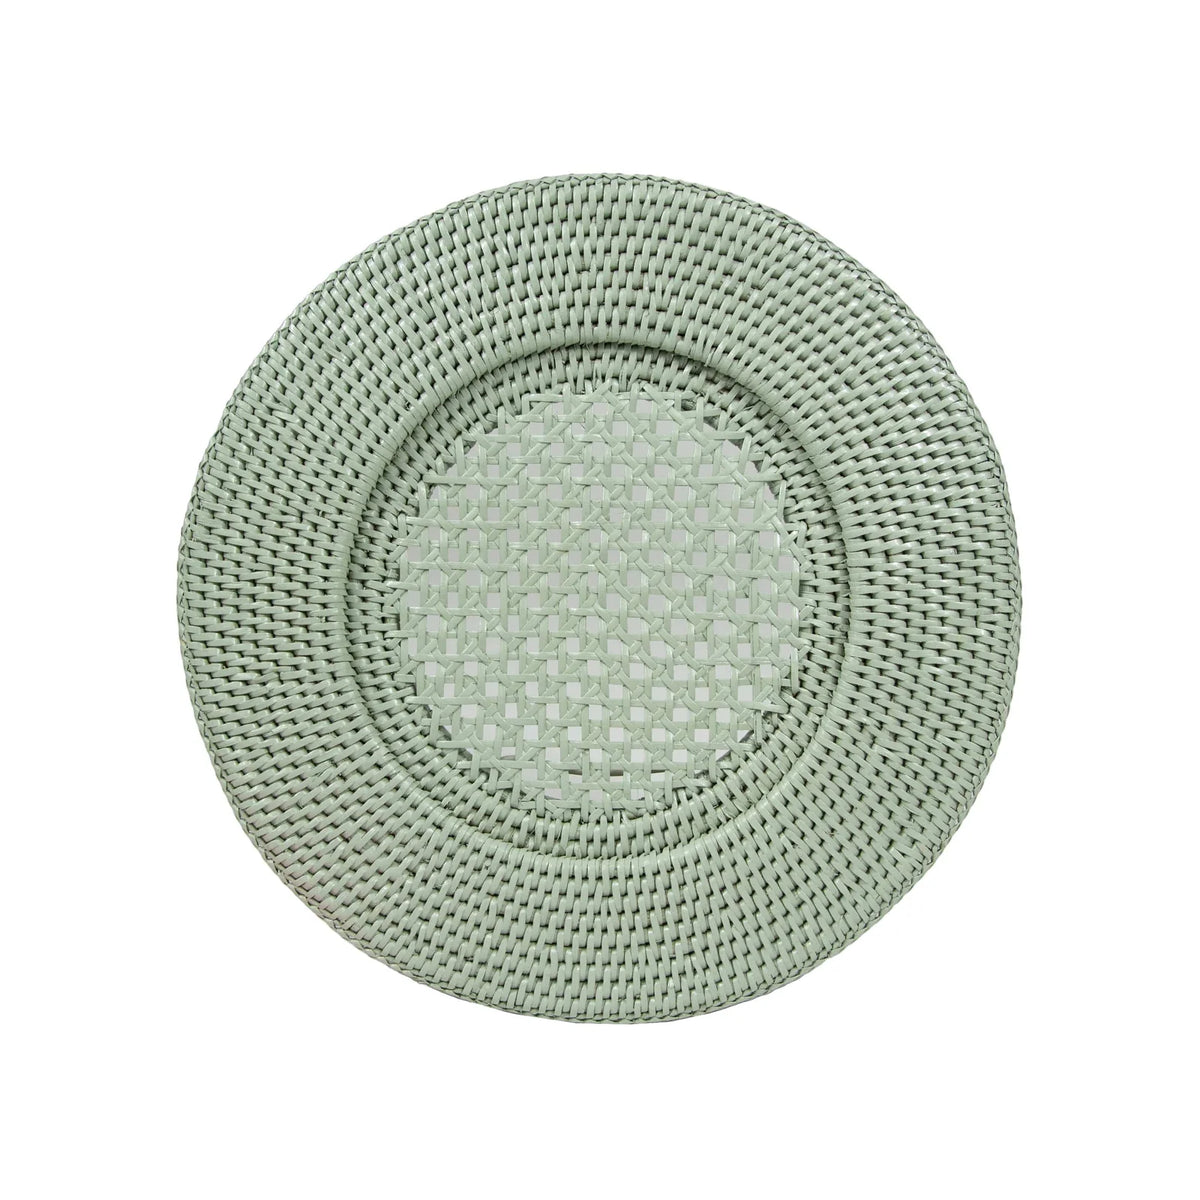 Rattan Round Charger Plate in Green